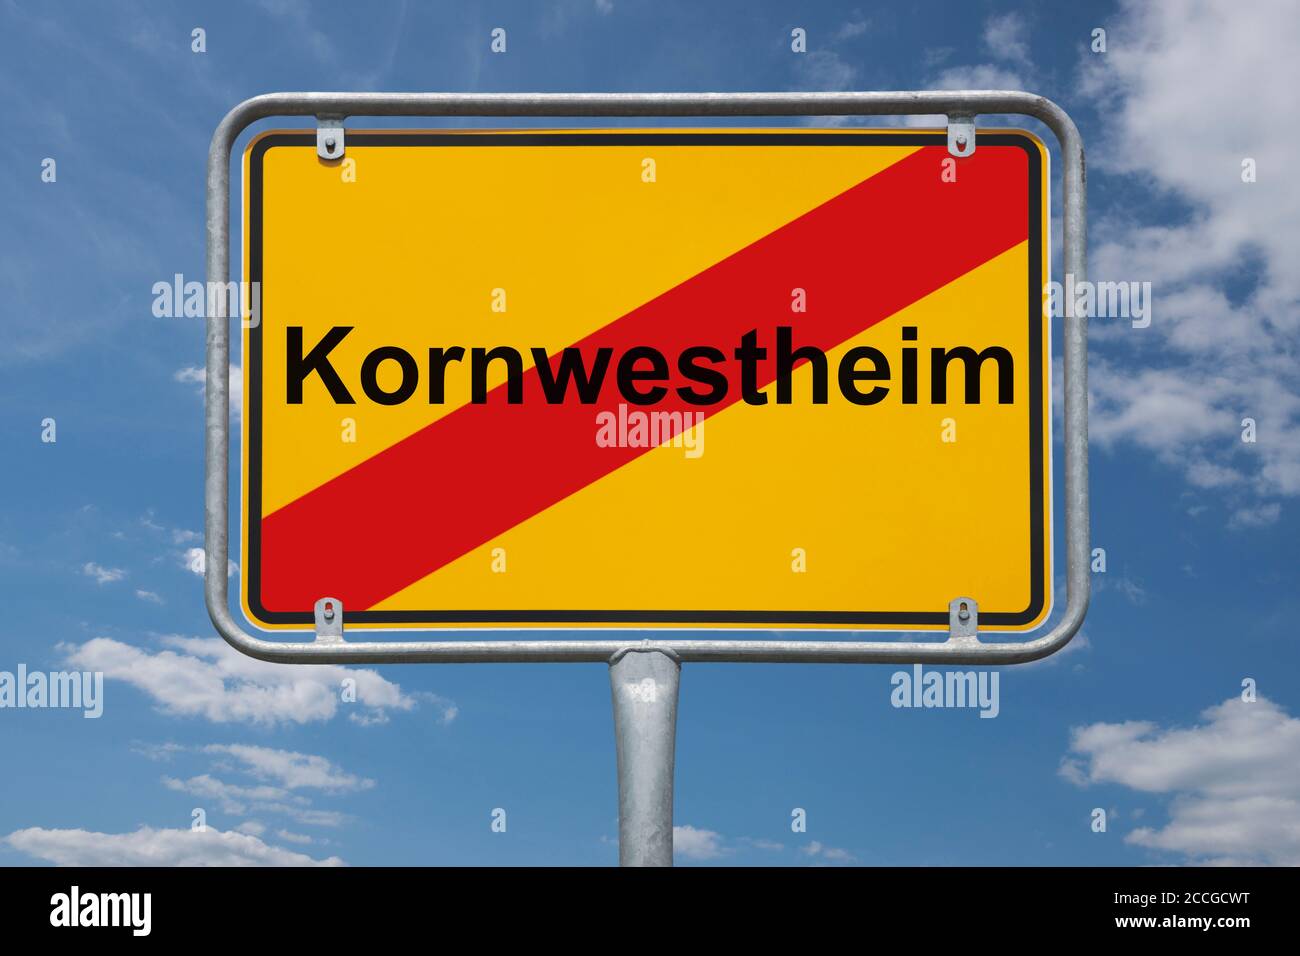 Kornwestheim High Resolution Stock Photography and Images - Alamy